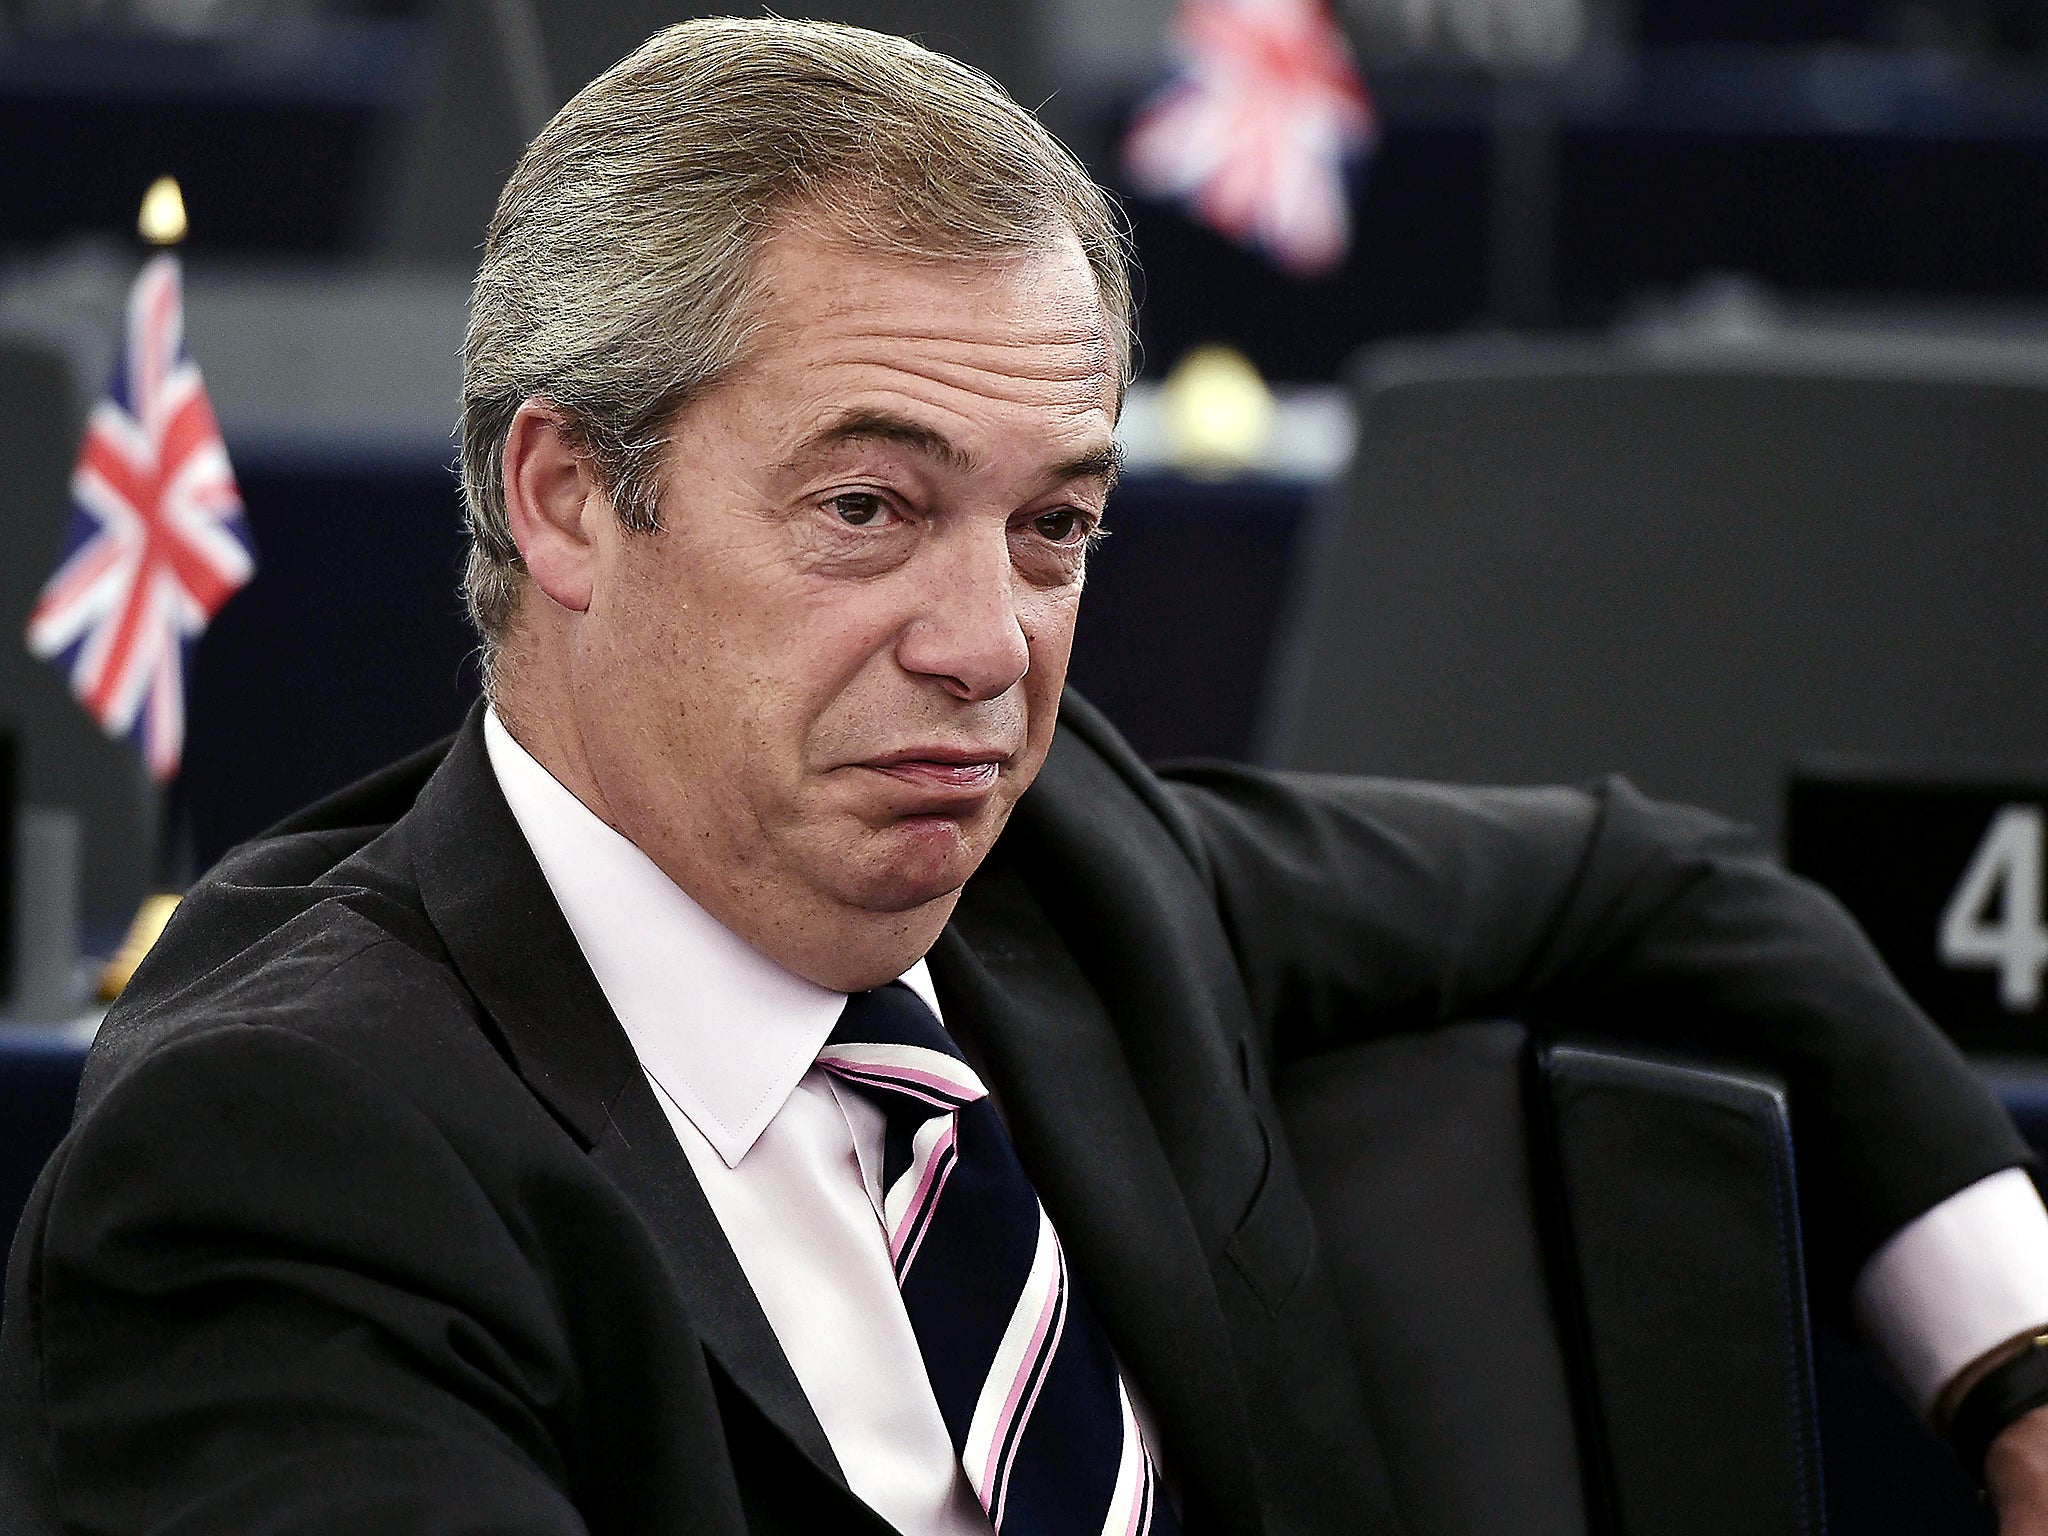 Nigel Farage is among MEPs who have enjoyed a pay boost from Brexit